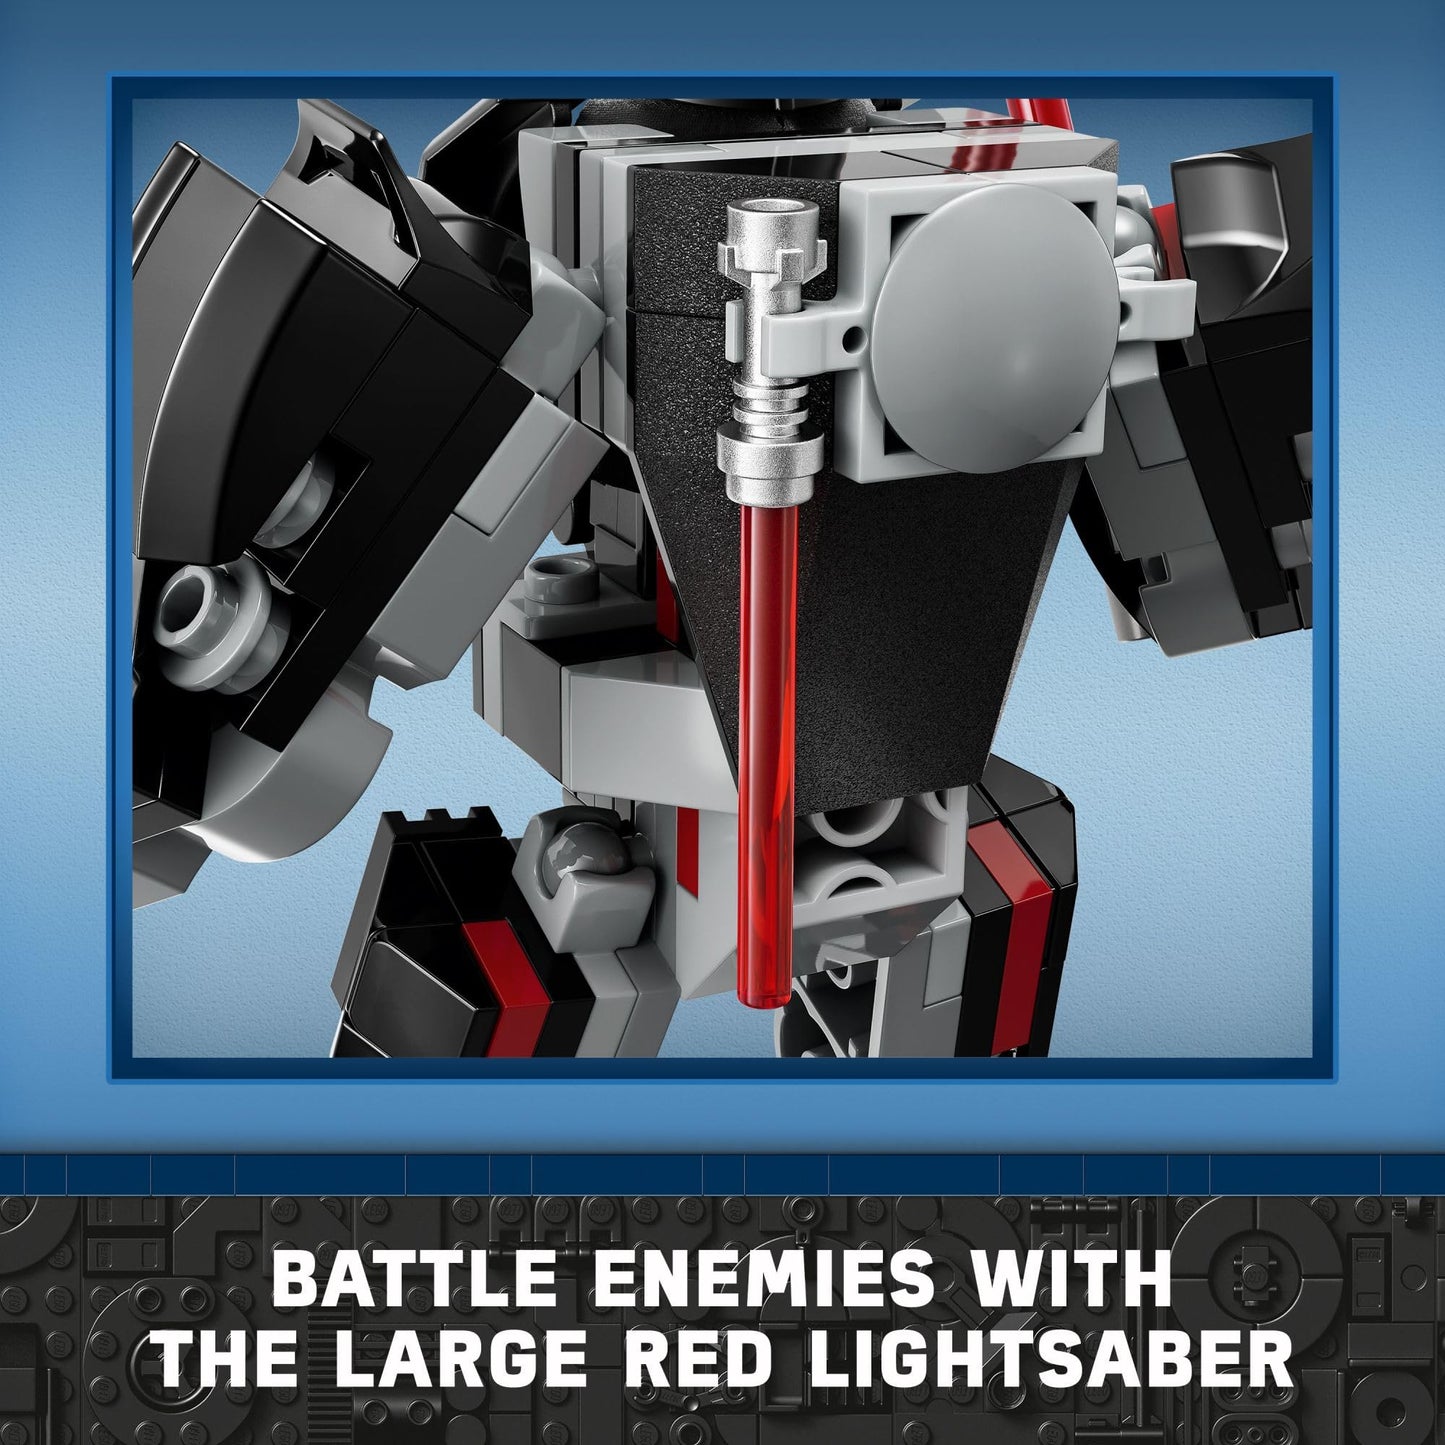 LEGO Star Wars Darth Vader Mech 75368 Buildable Star Wars Action Figure, This Collectible Star Wars Toy for Kids Ages 6 and Up Features an Opening Cockpit, Buildable Lightsaber and 1 Minifigure